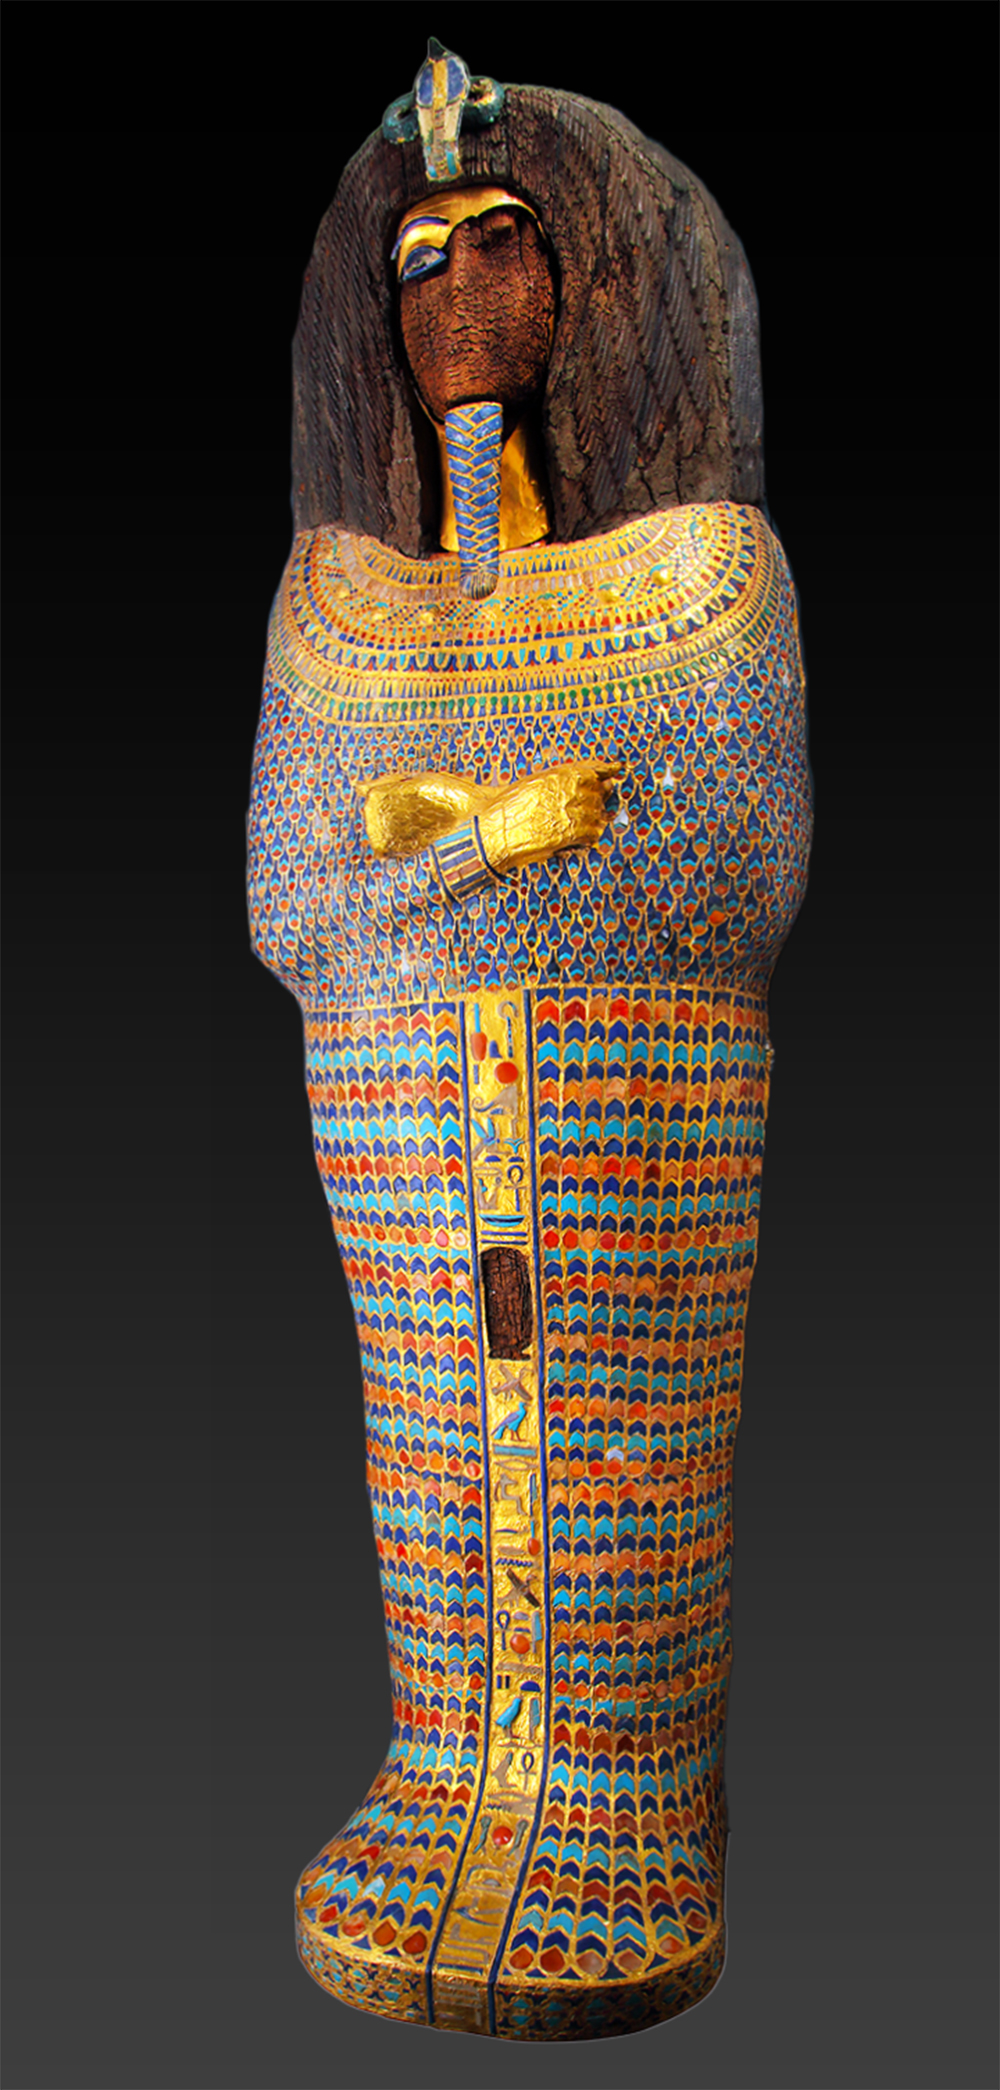 A wooden Coffin of Akhenaten, an ancient Egyptian figure with a headdress, a beard, and a golden hands. The coffin is decorated with colorful patterns and designs.